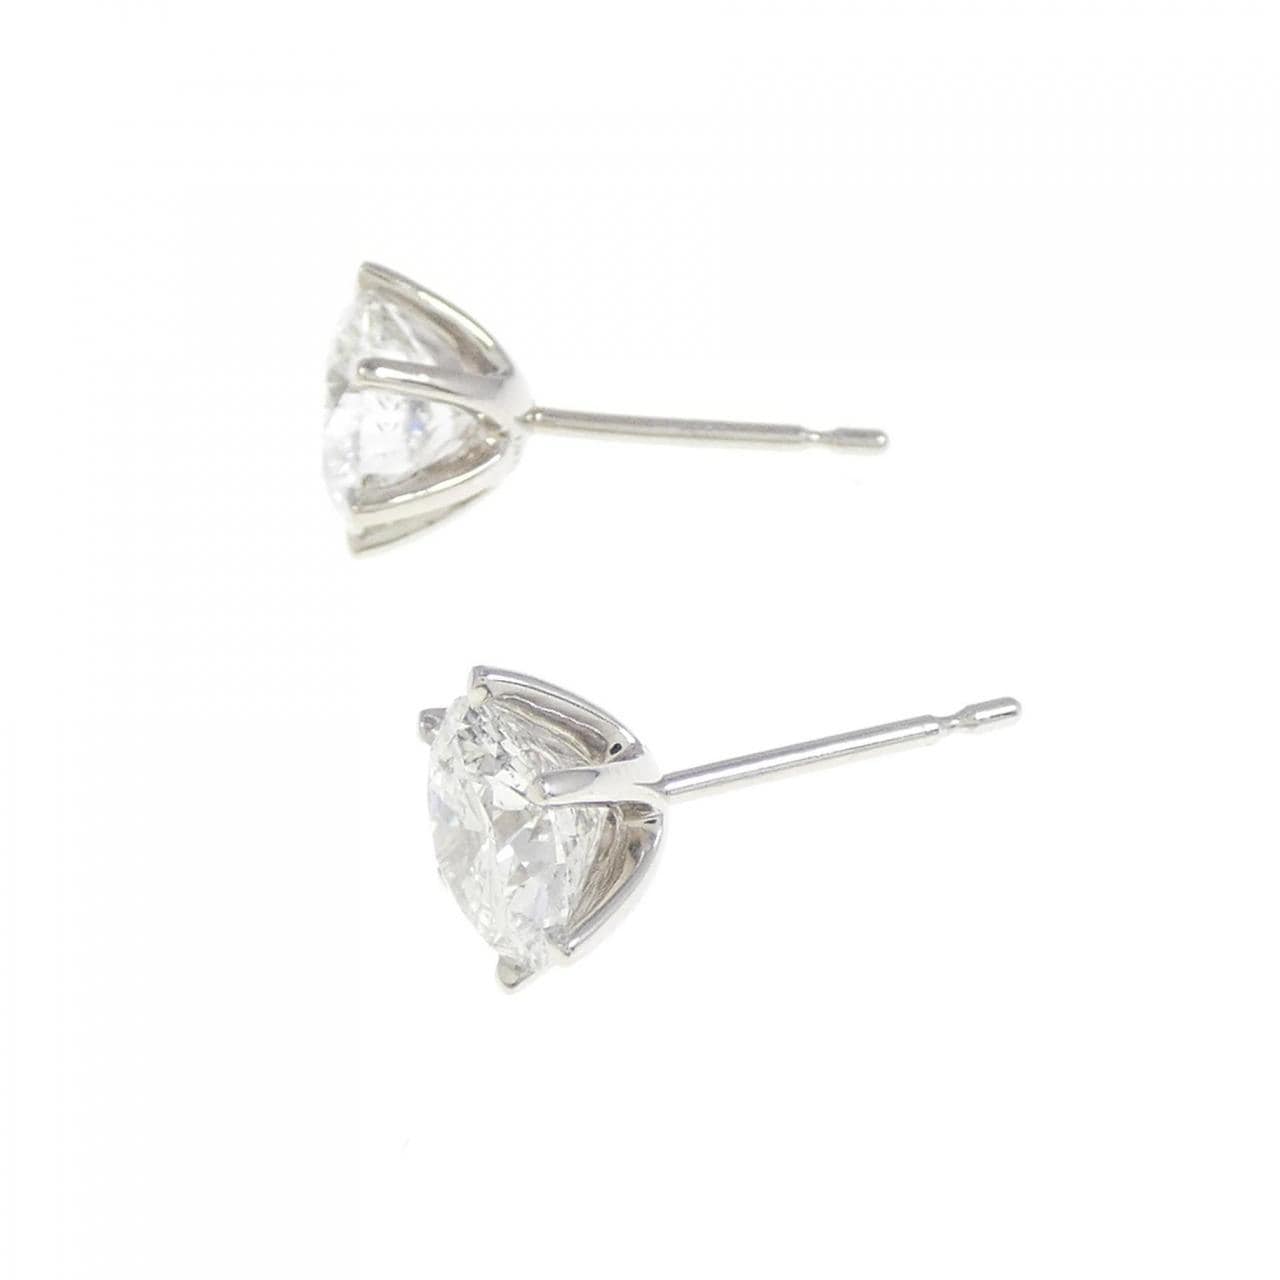 [Remake] Diamond earrings 1.004CT 1.071CT G SI2 EXT